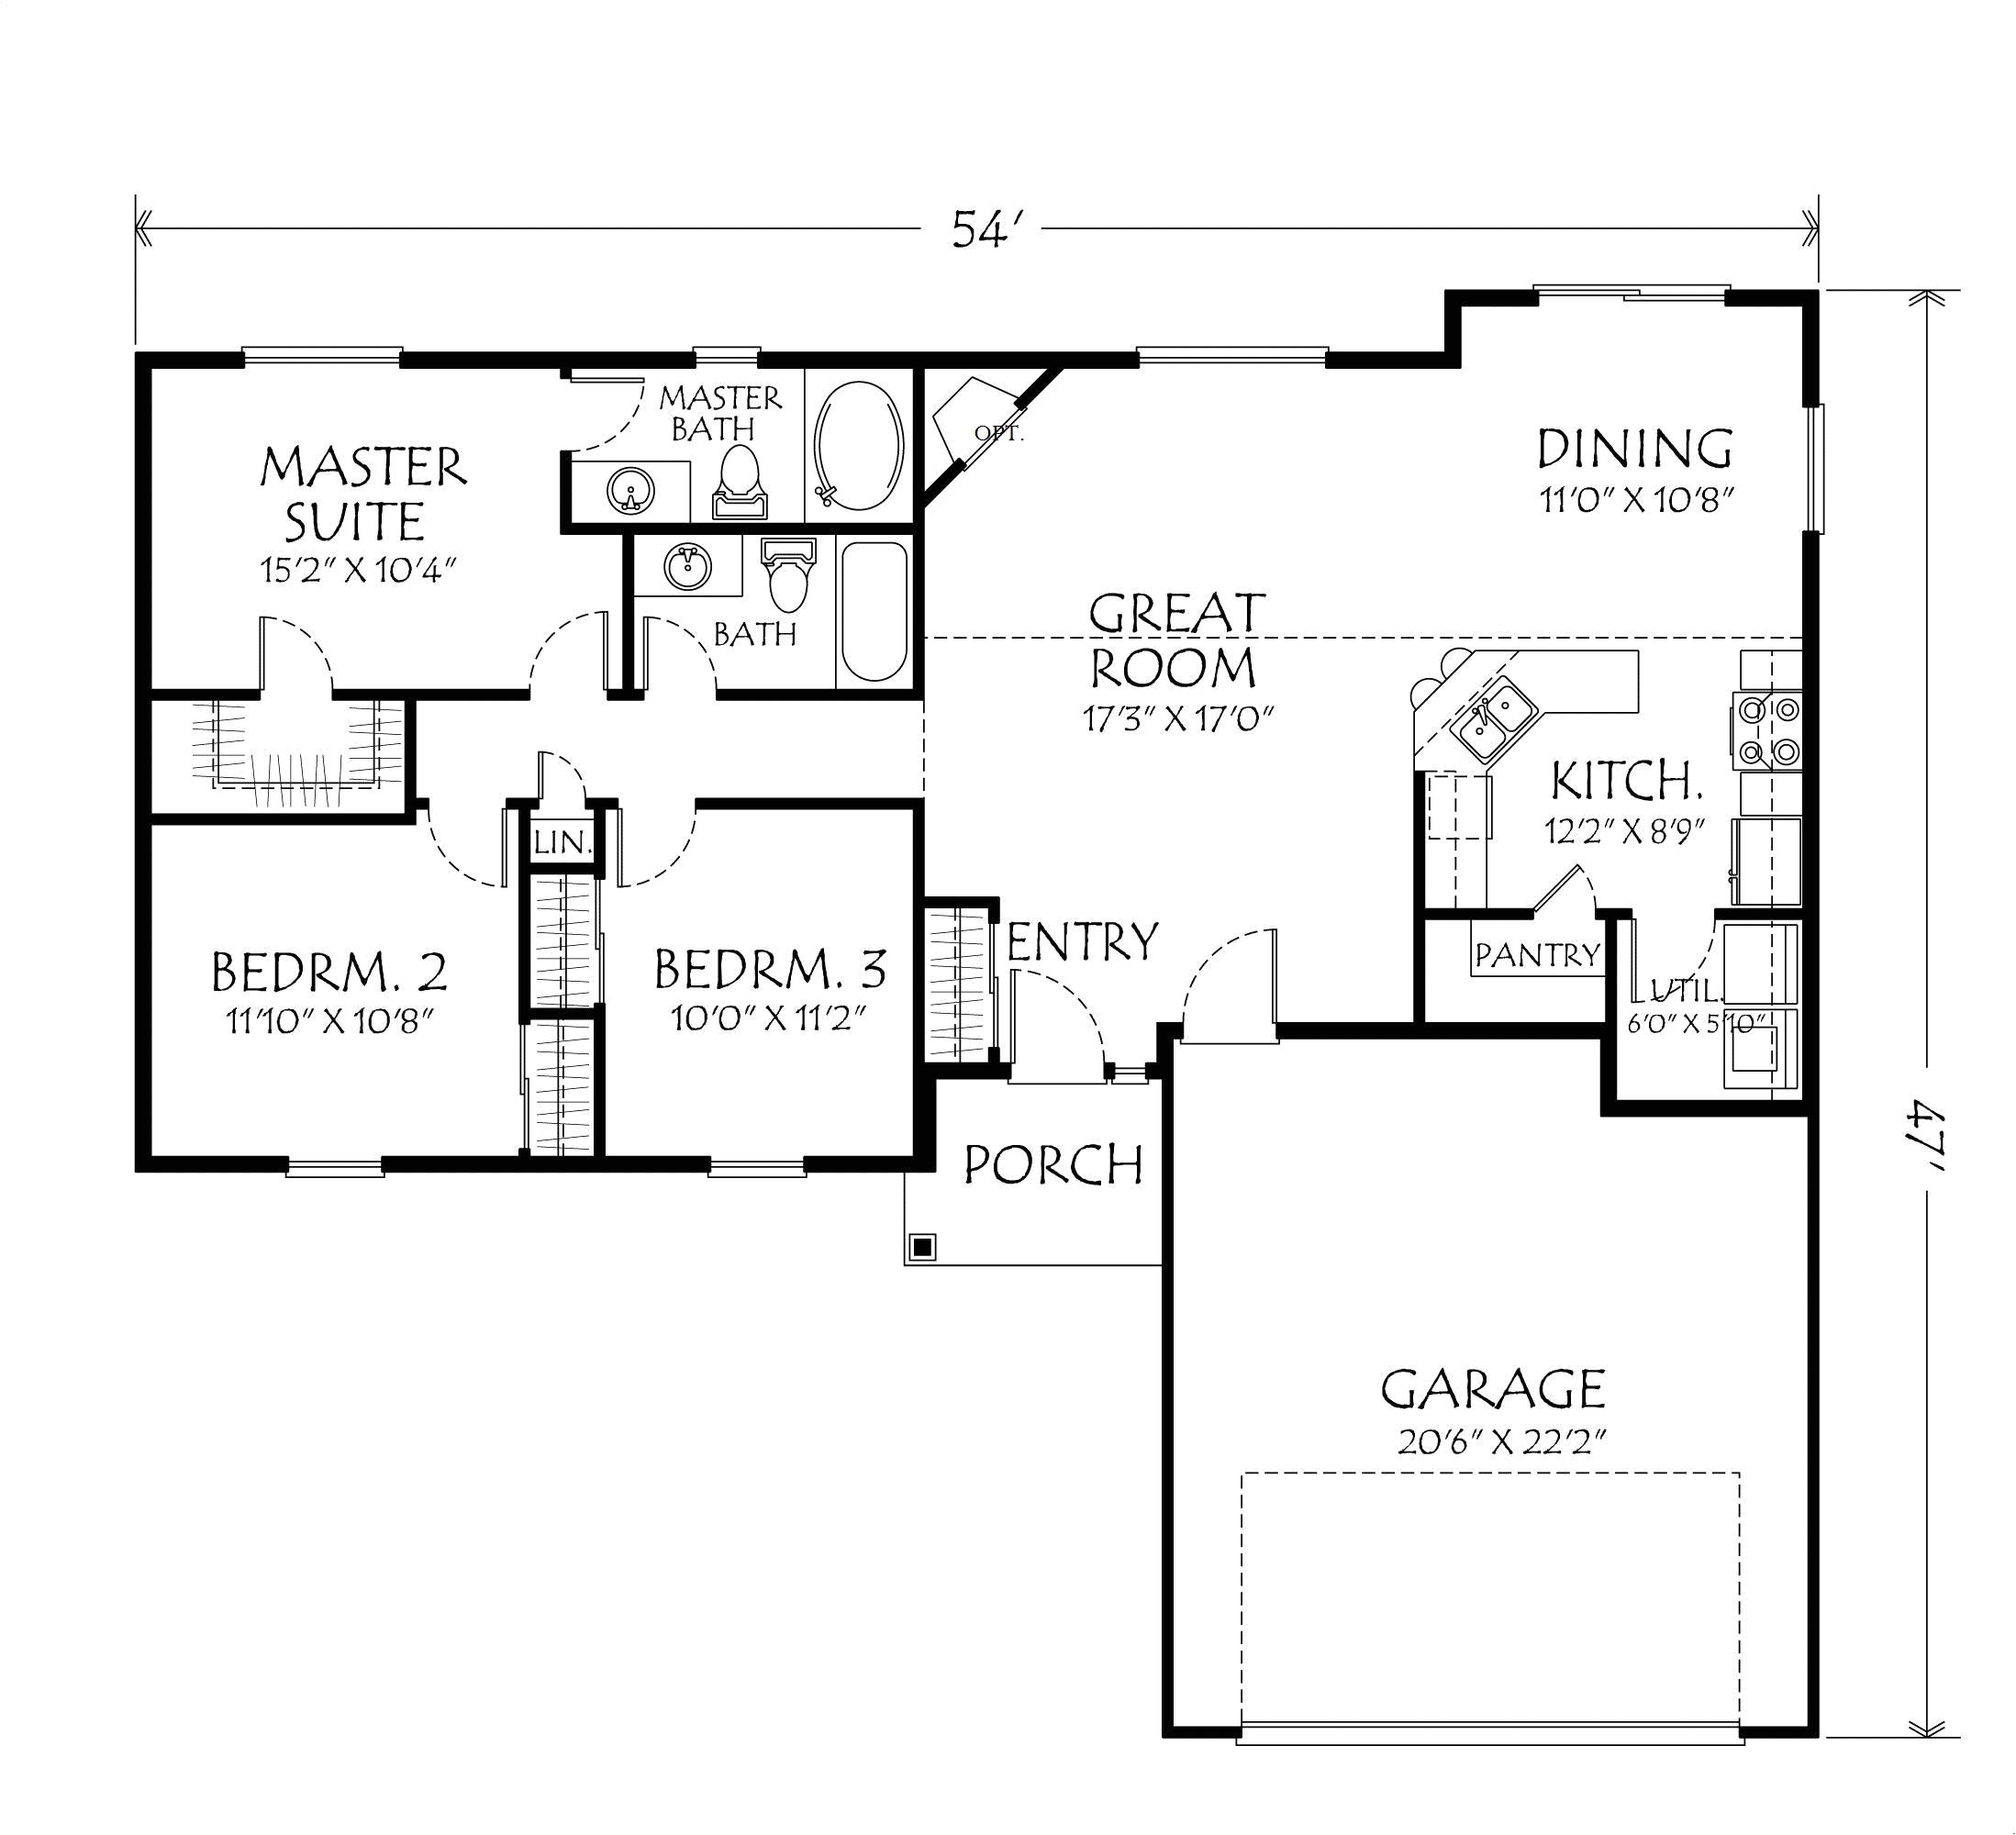 Floor Plans for One Level Homes Small House Plans One Level 2018 House Plans